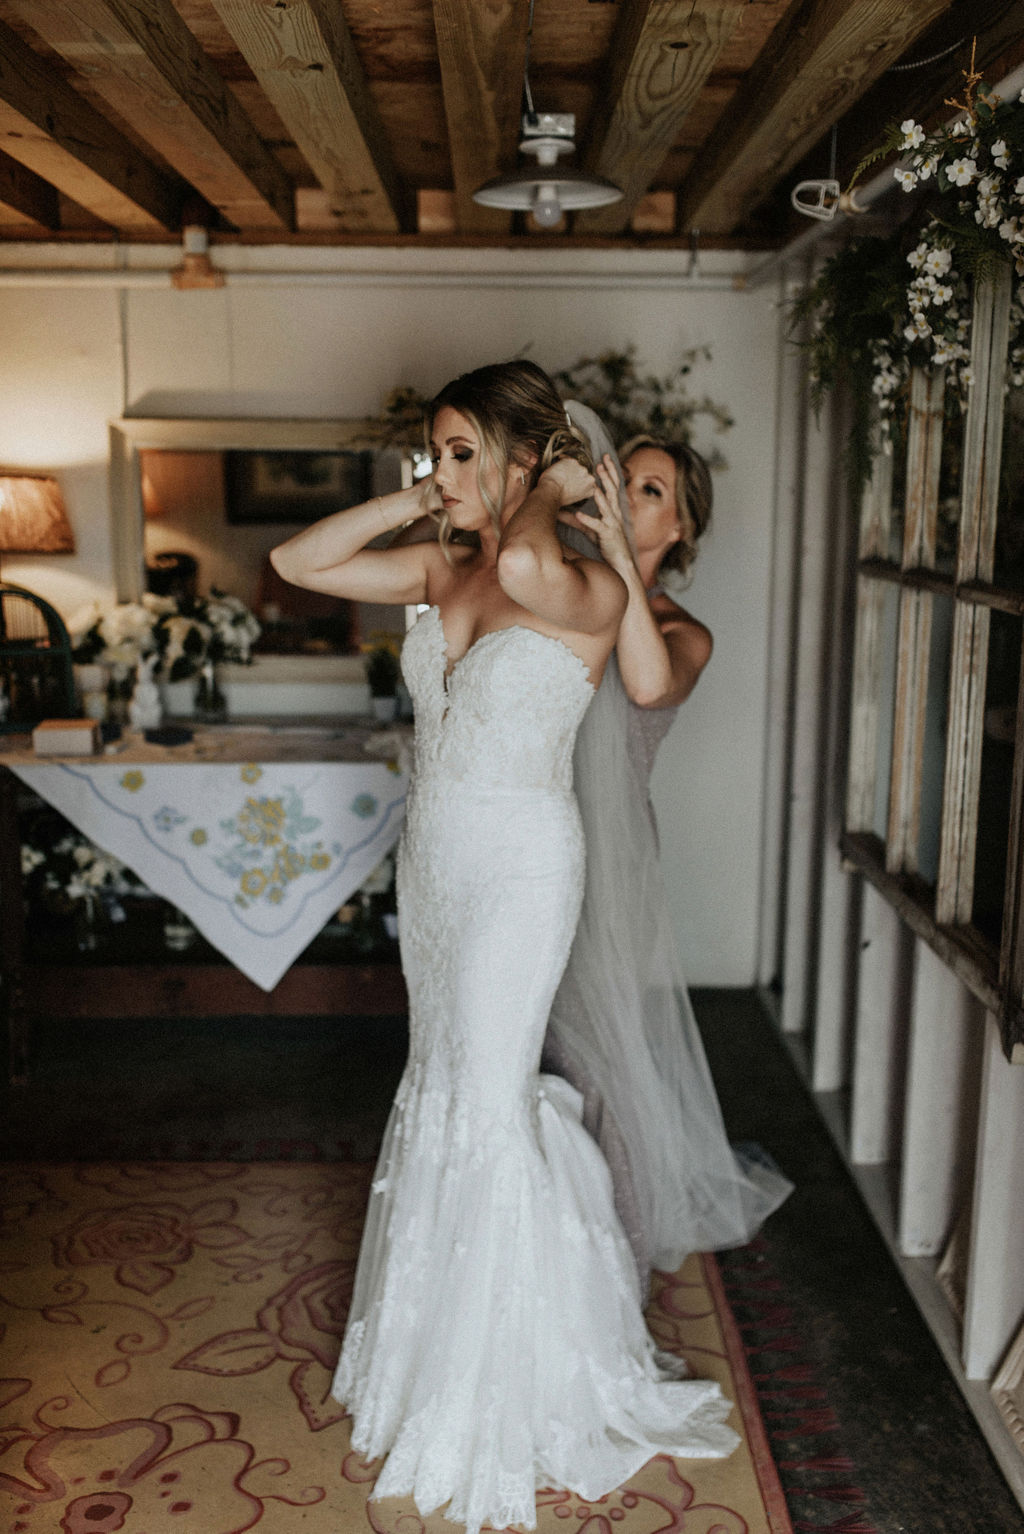 A bride and her mom getting ready for her wedding day